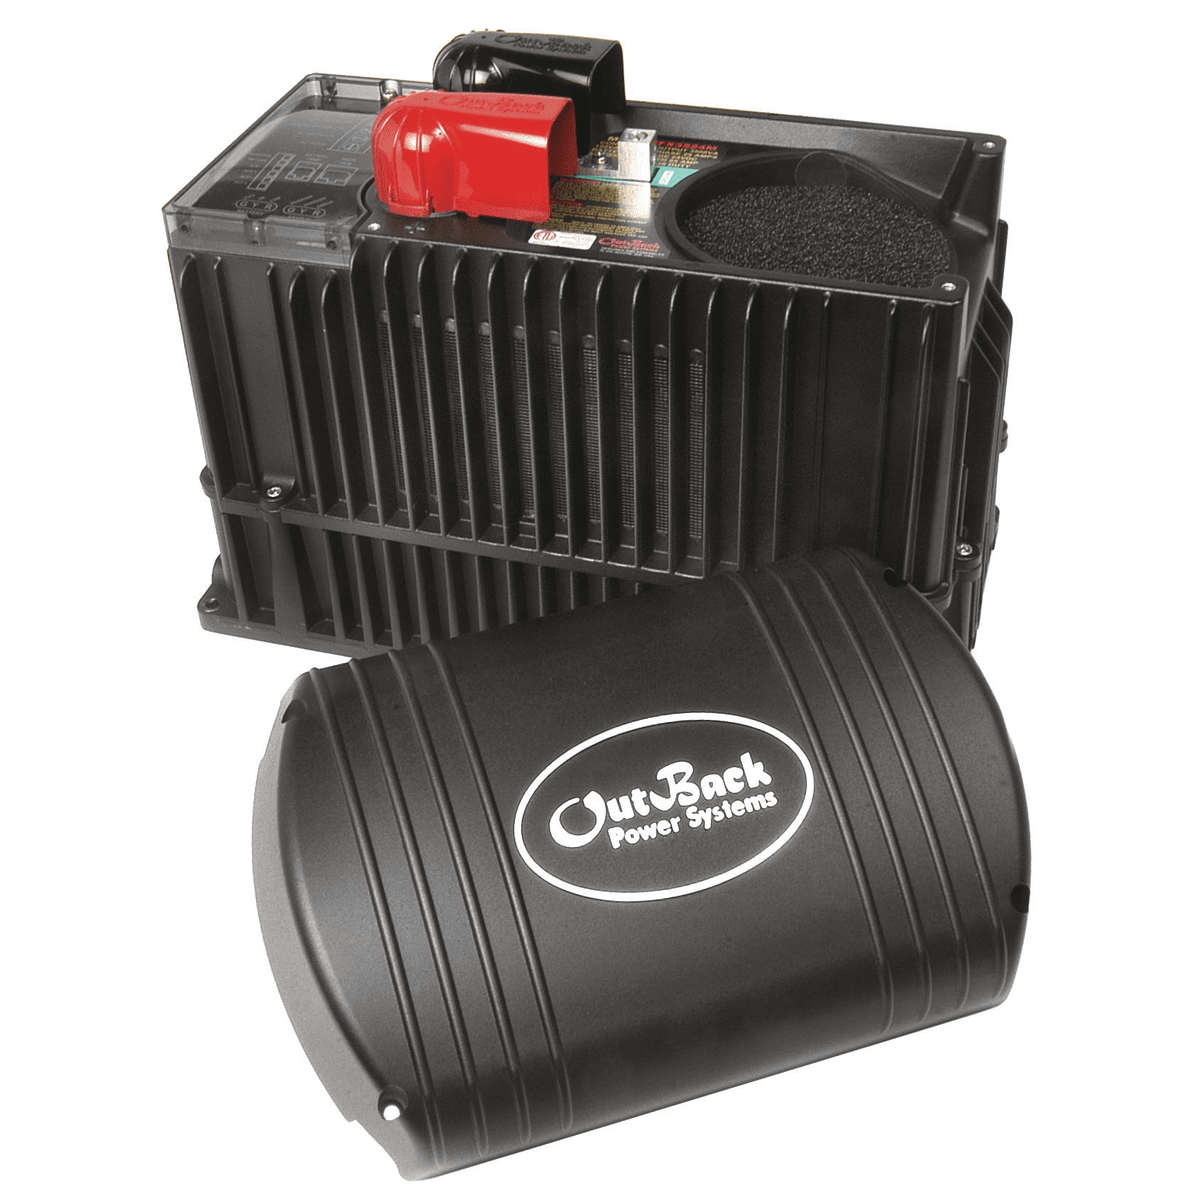 Outback Power Systems 3500W VFX-Mobile Series SW Inverter Charger - Vented, 24V DC, 120V AC, 85A